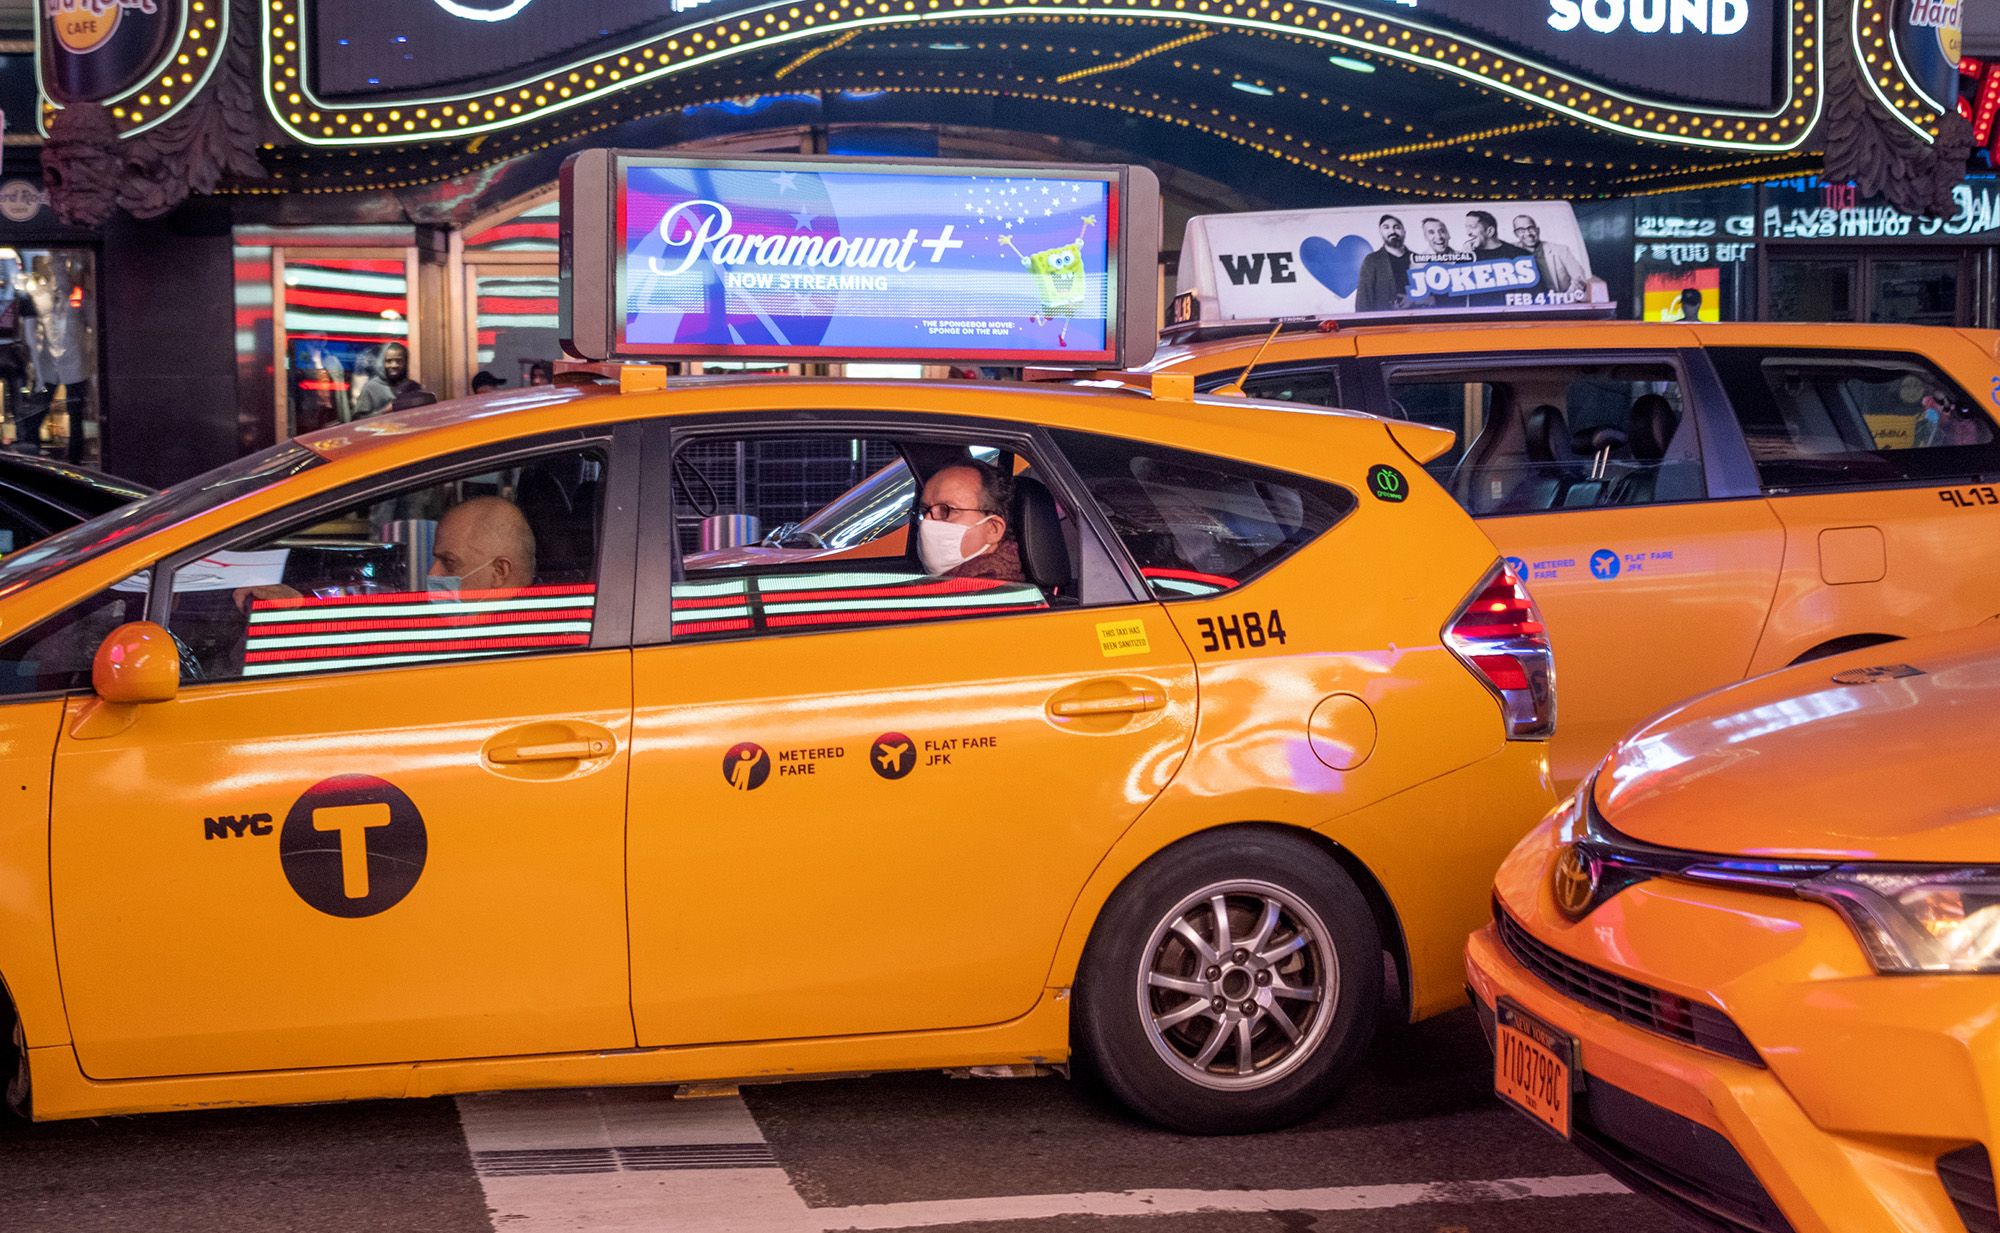 Taxi cabs pass through Times Square in New York on March 11.